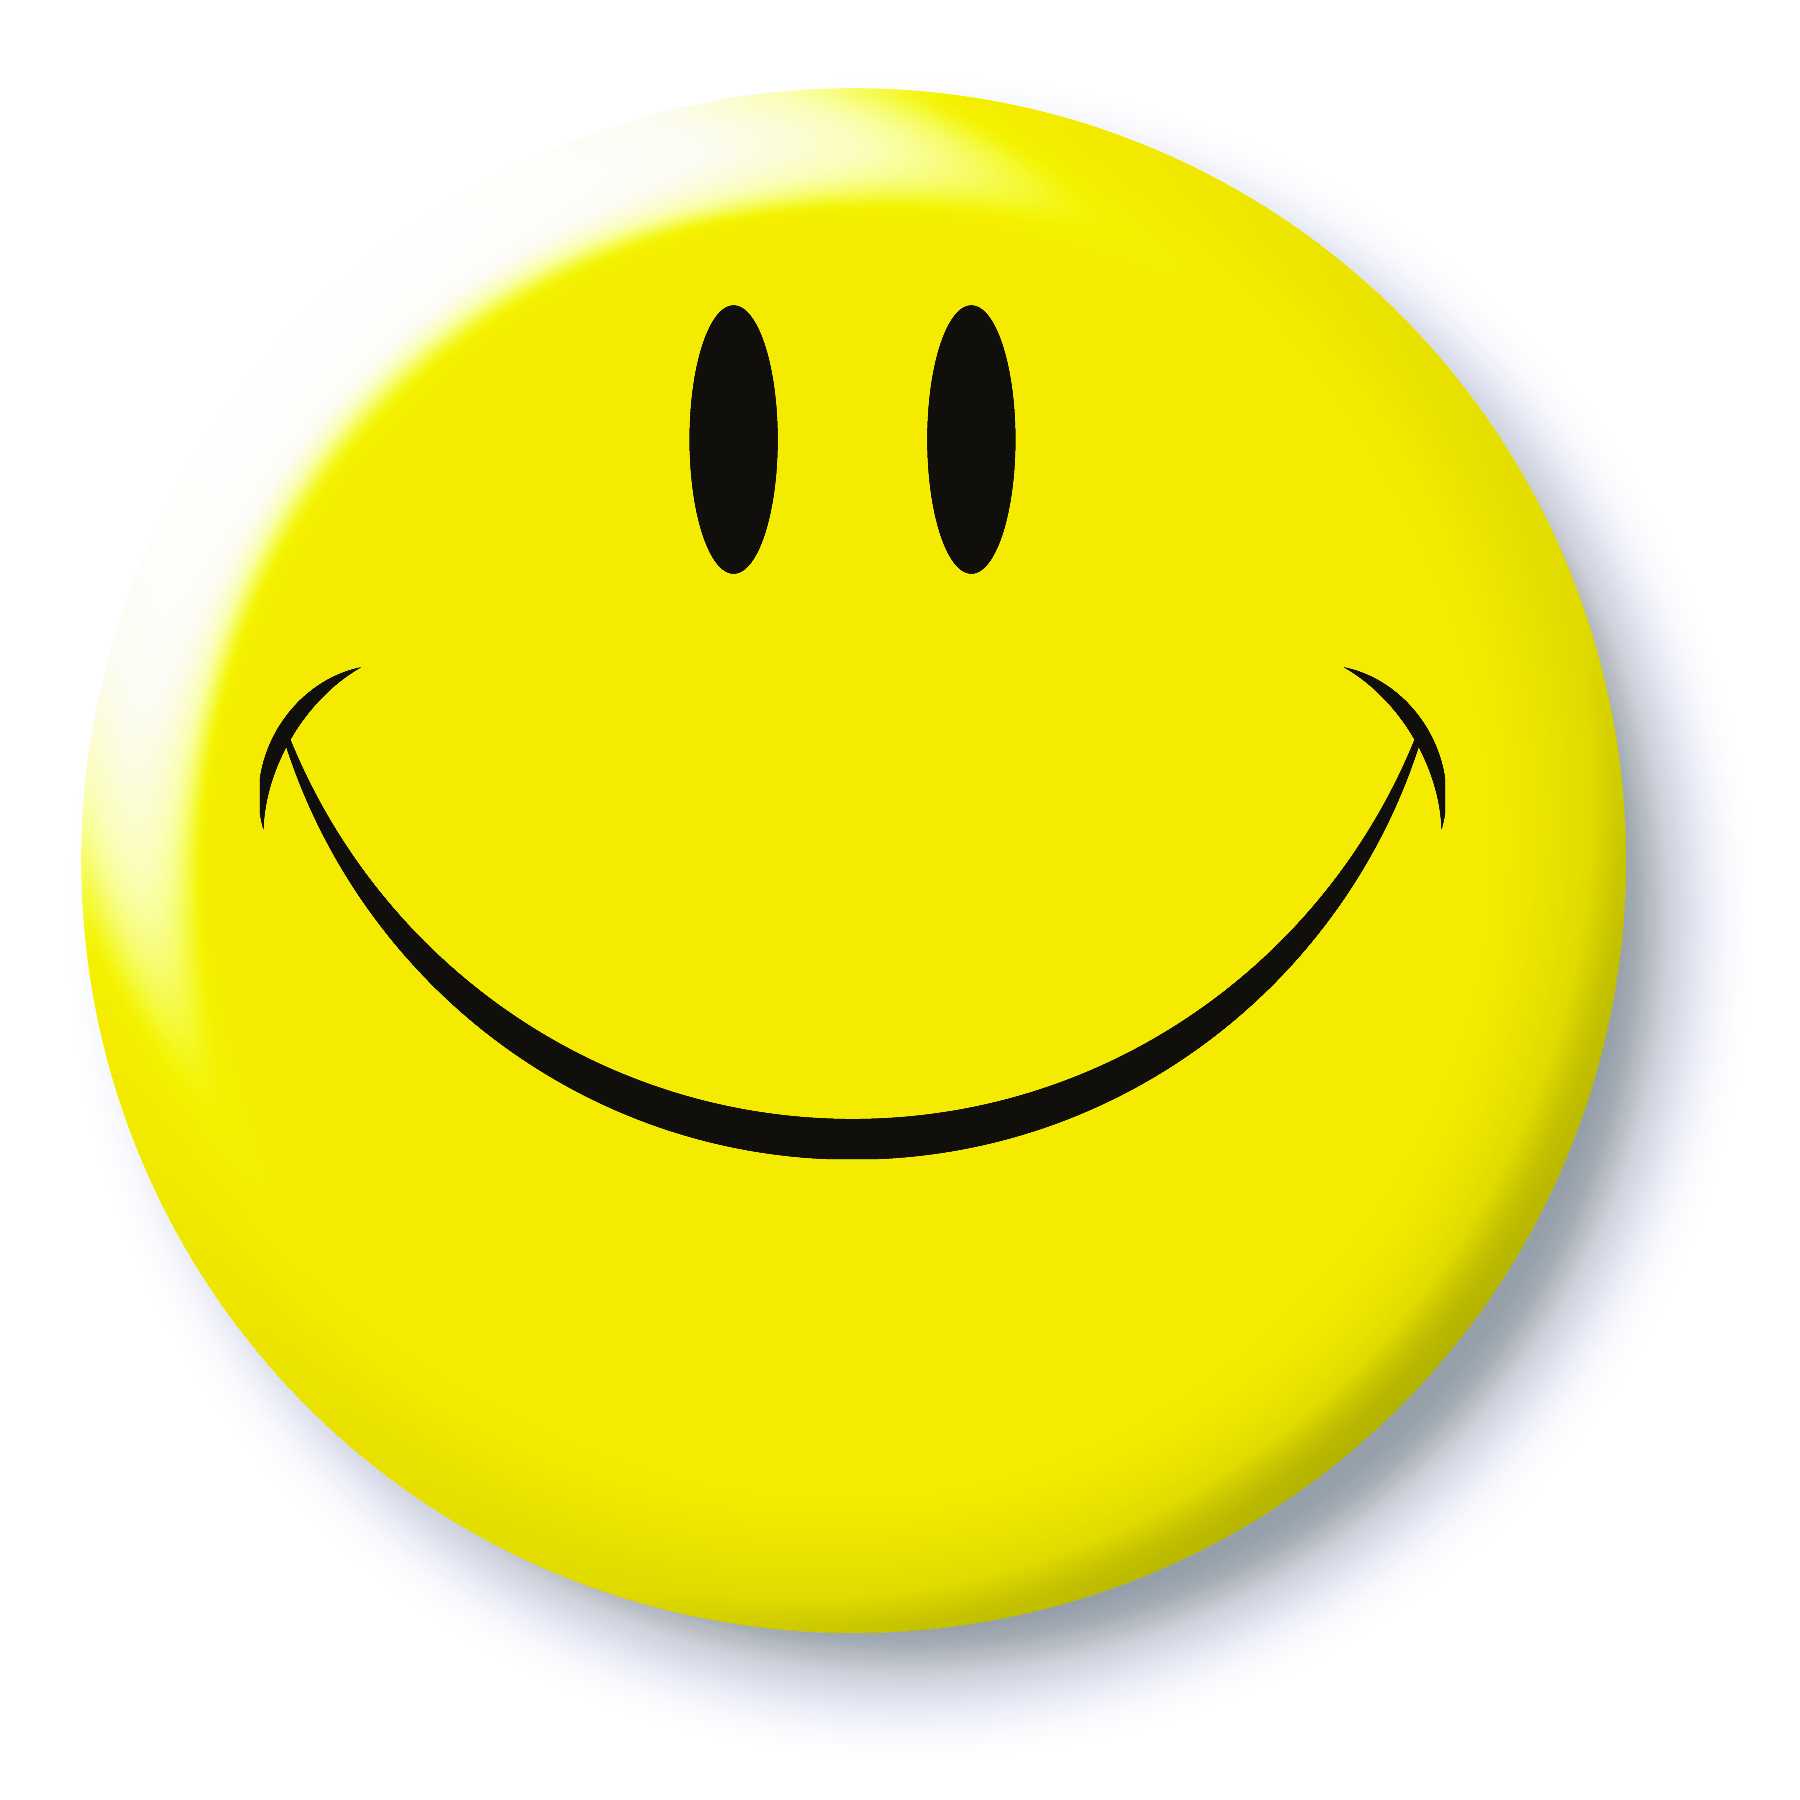 Big Happy Smiley Face - ClipArt Best - ClipArt Best